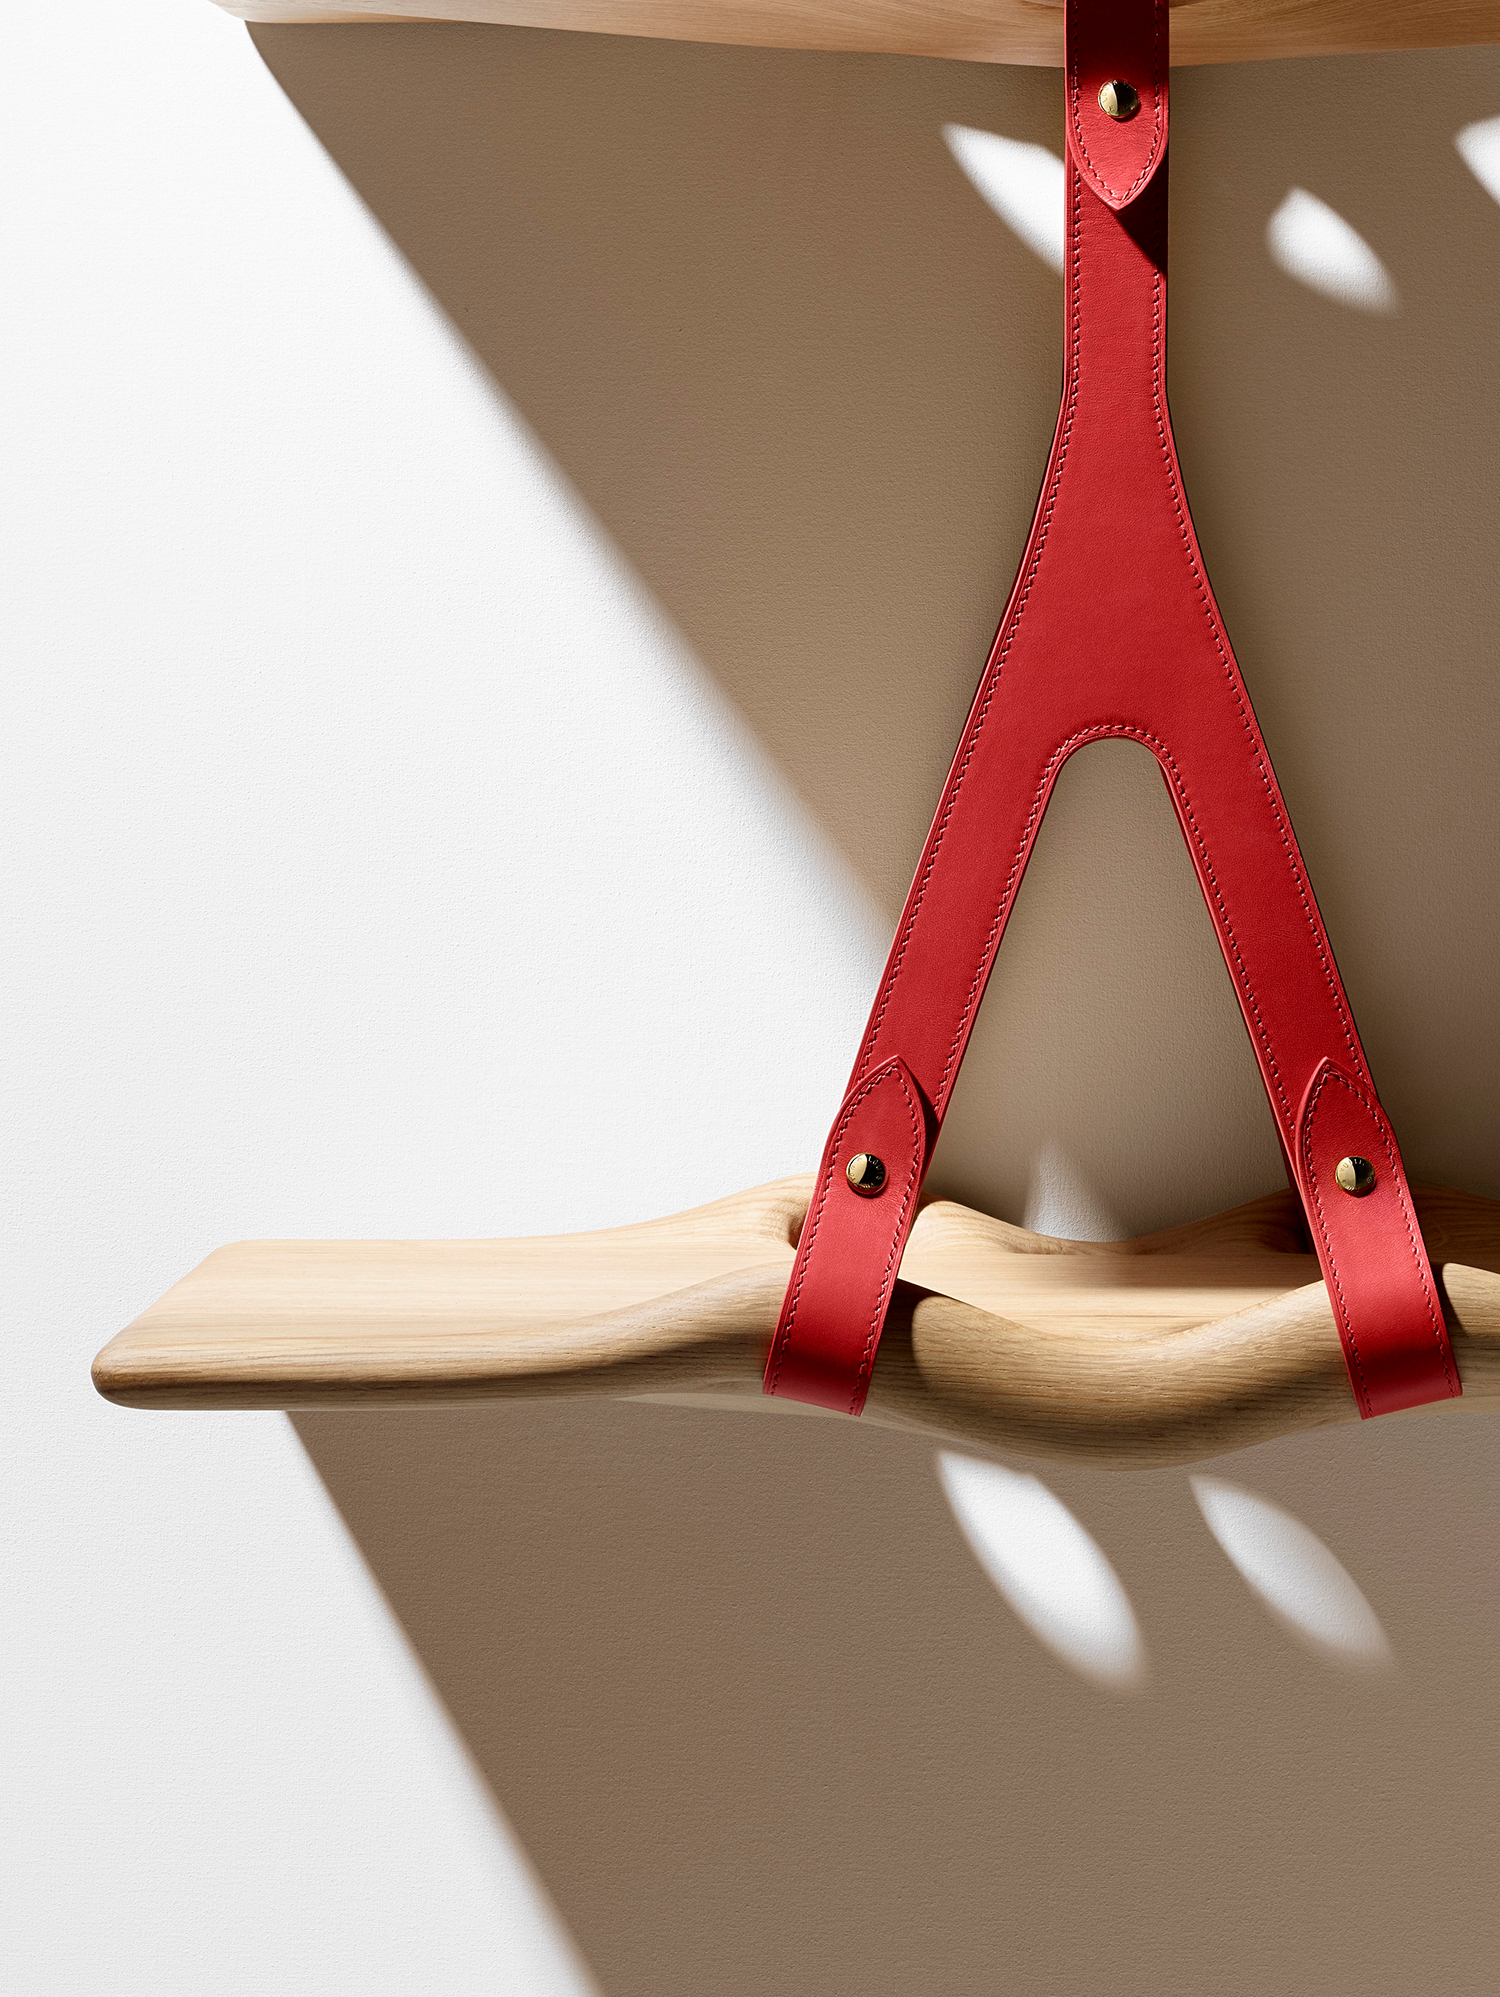 A detail of the Swell Waves Shelf, crafted of smoothly polished oak with leather straps as brackets.